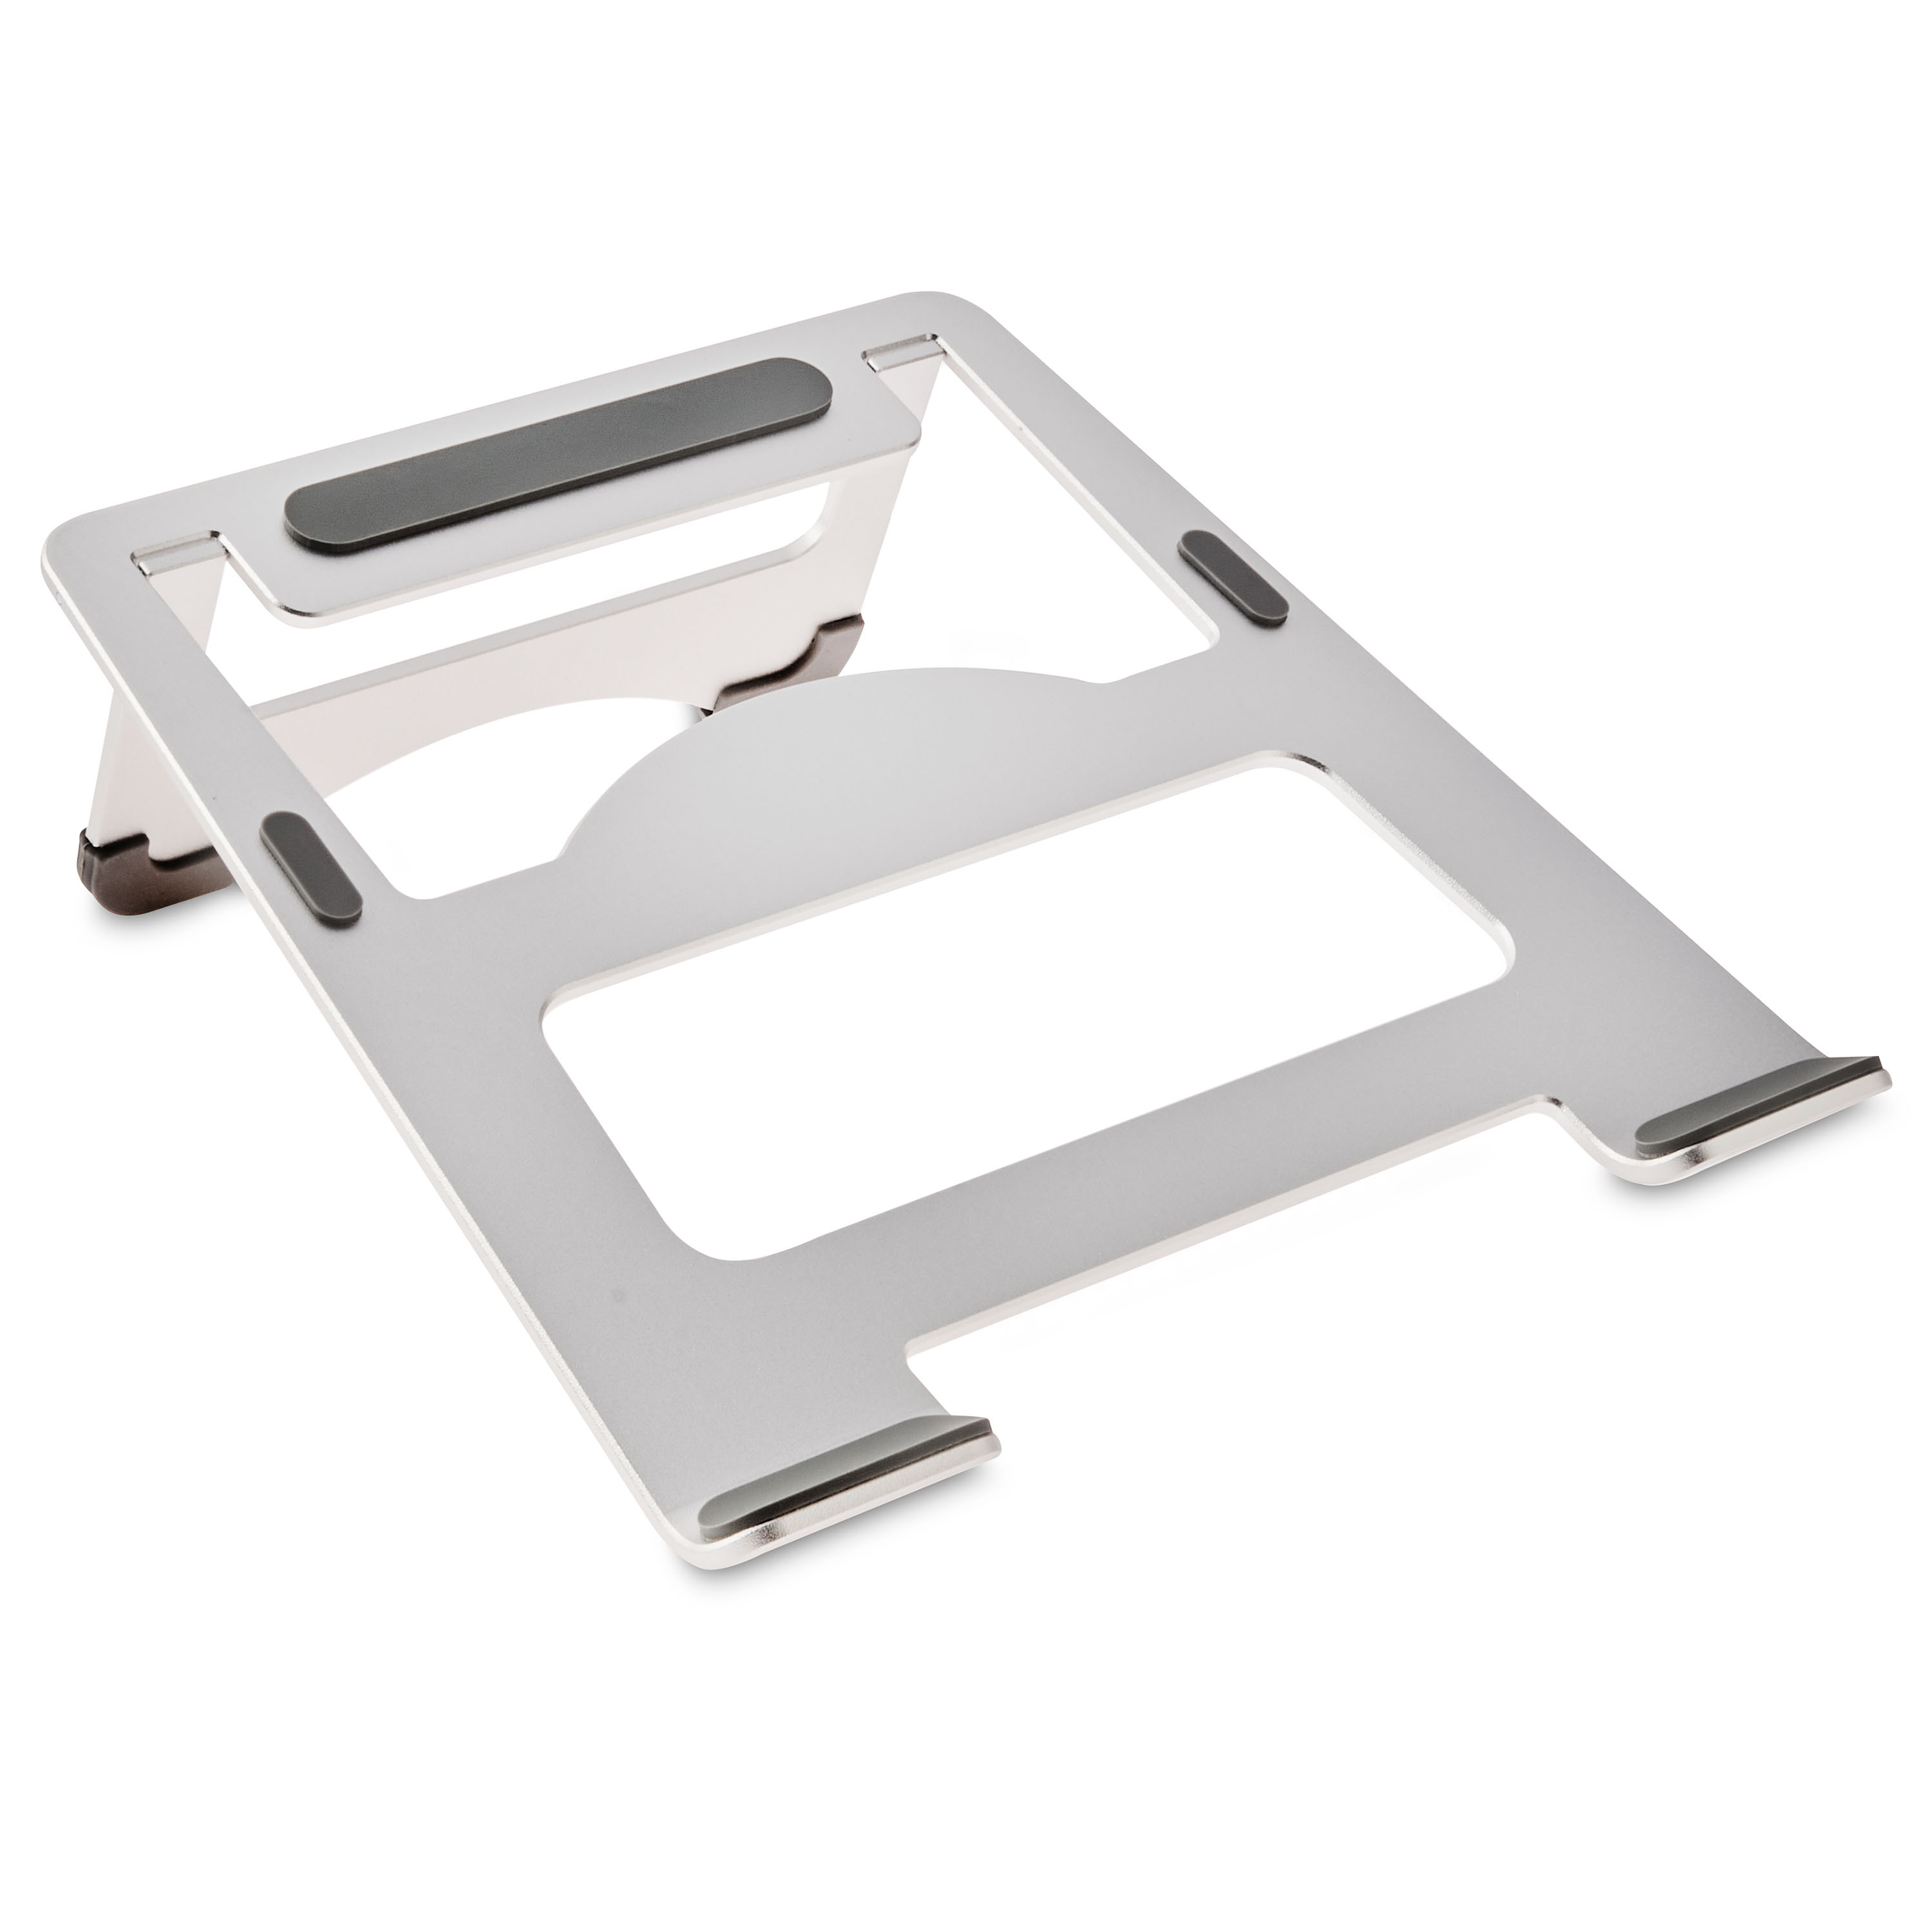 onn. Laptop Stand for 13" to 17" Chromebooks or Laptops - image 2 of 4